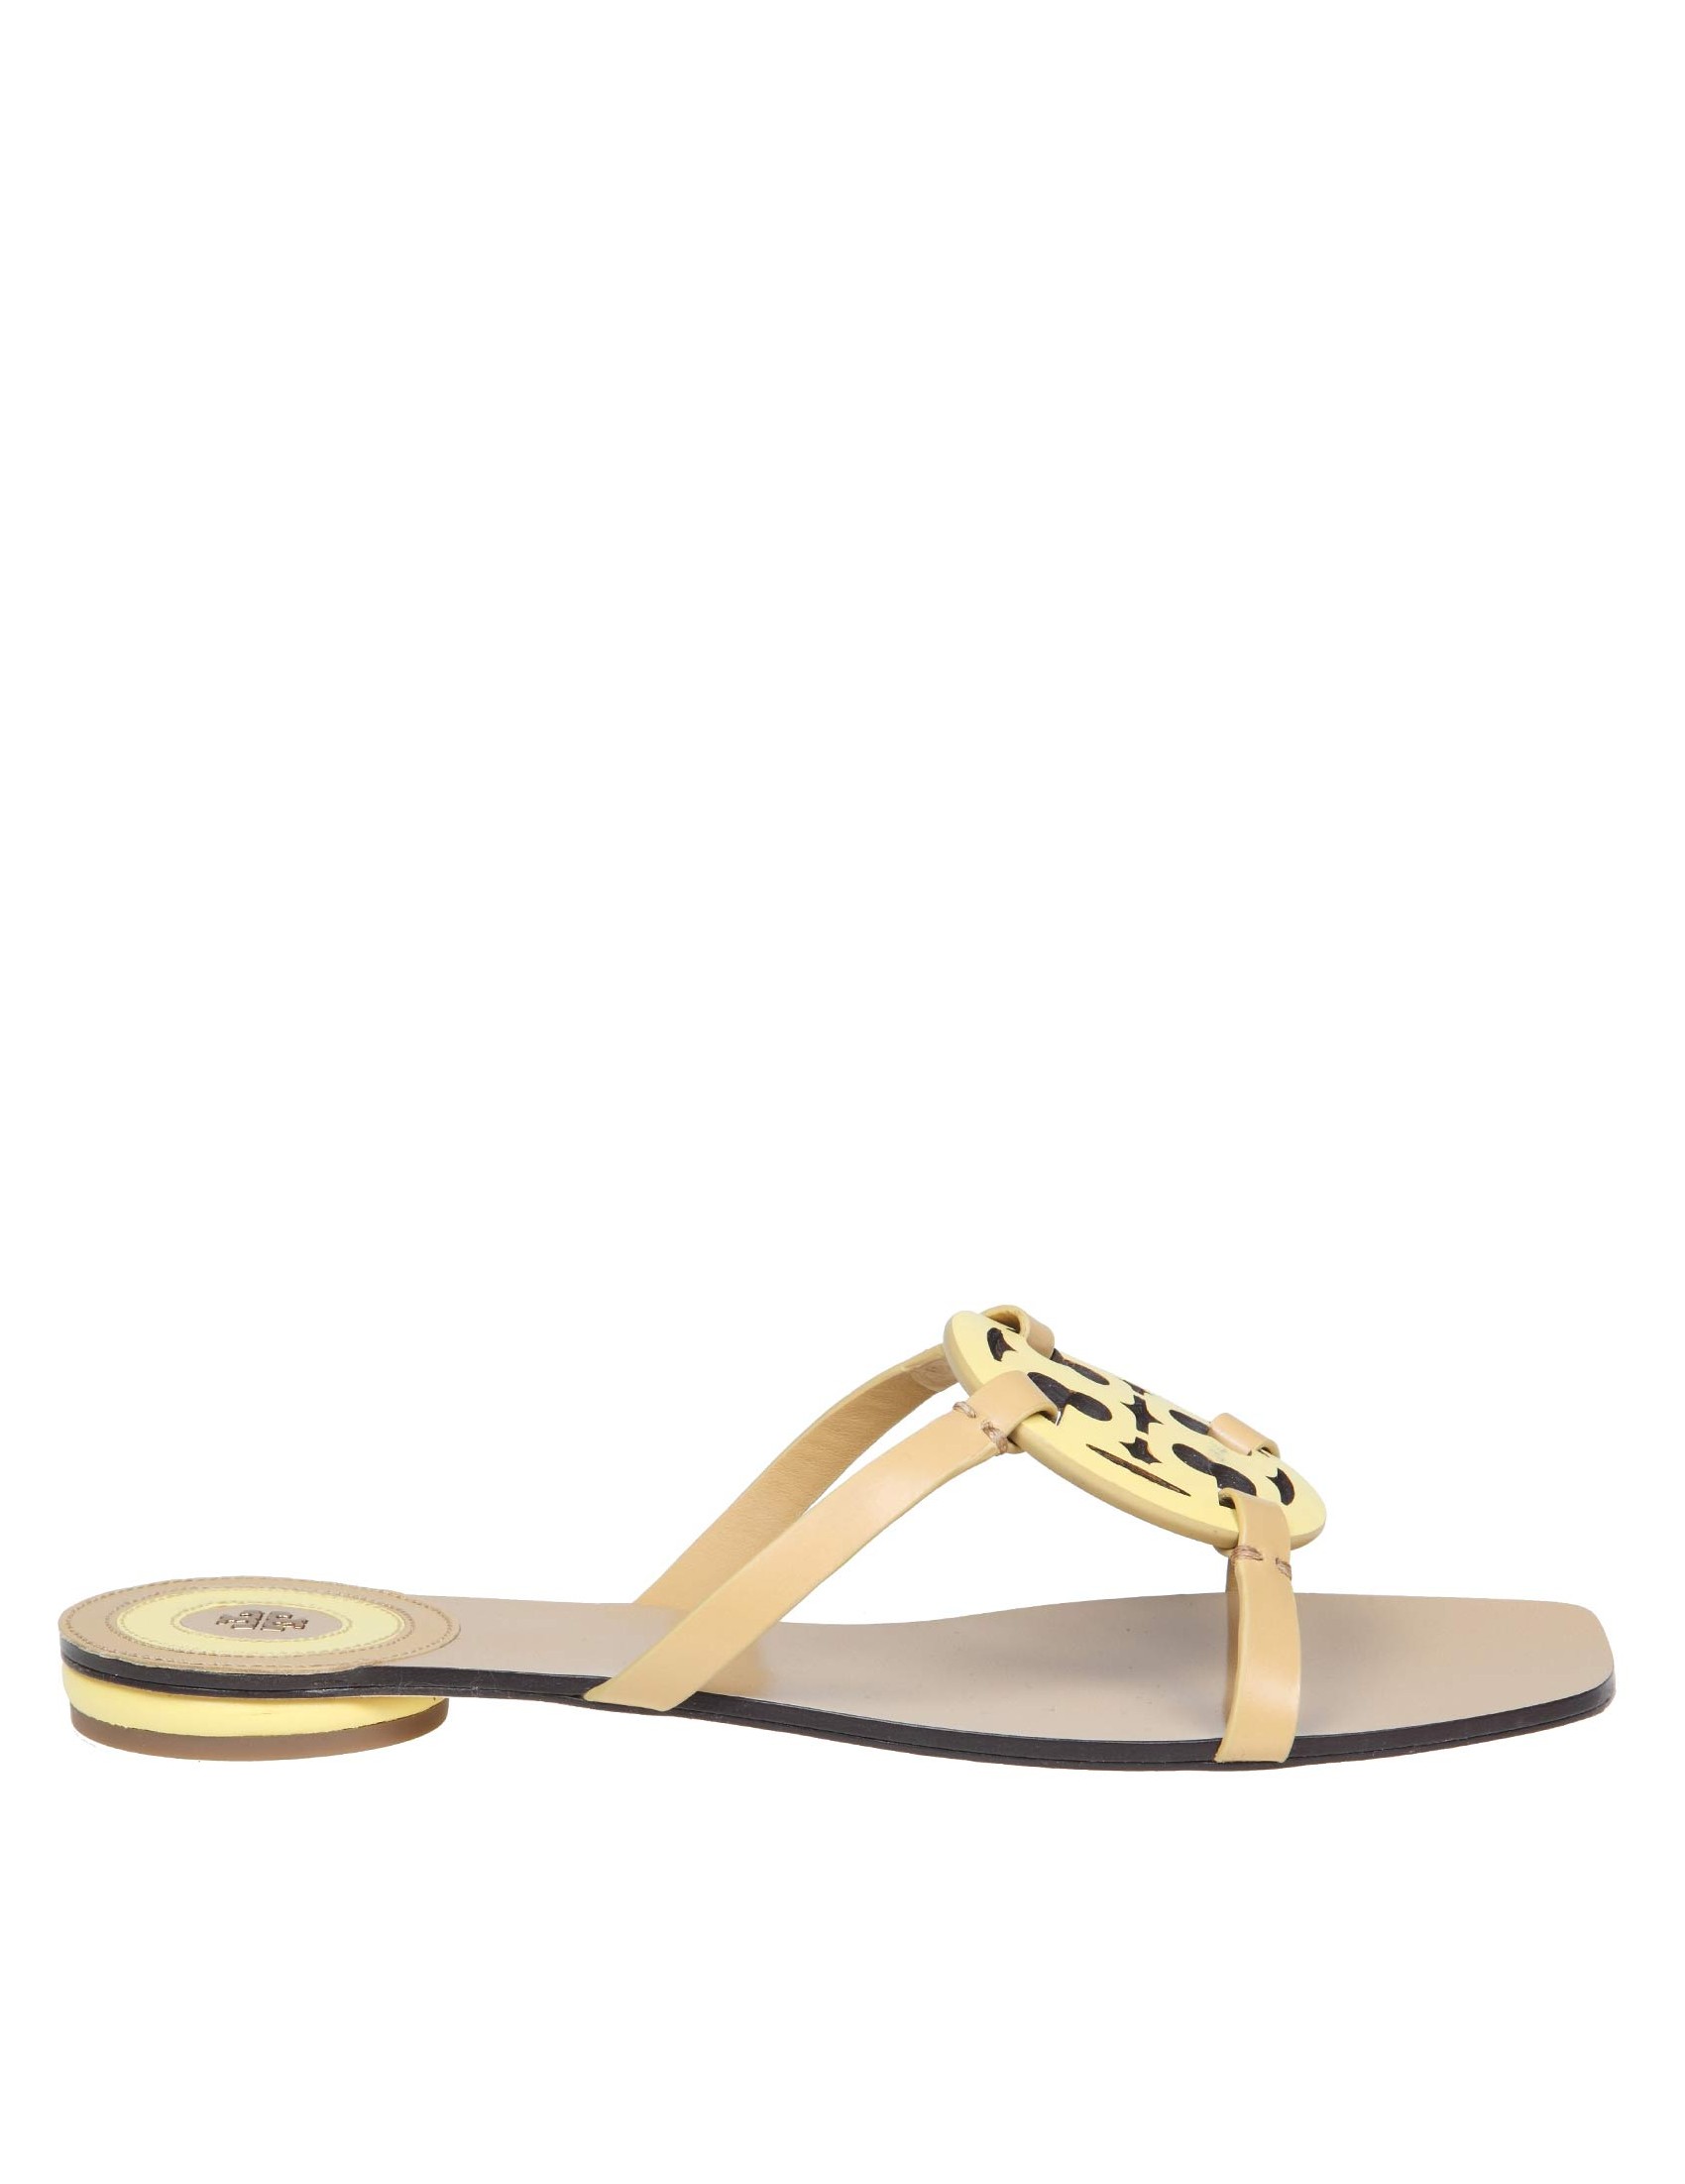 TORY BURCH MILLER SANDAL IN LEATHER WITH LOGO